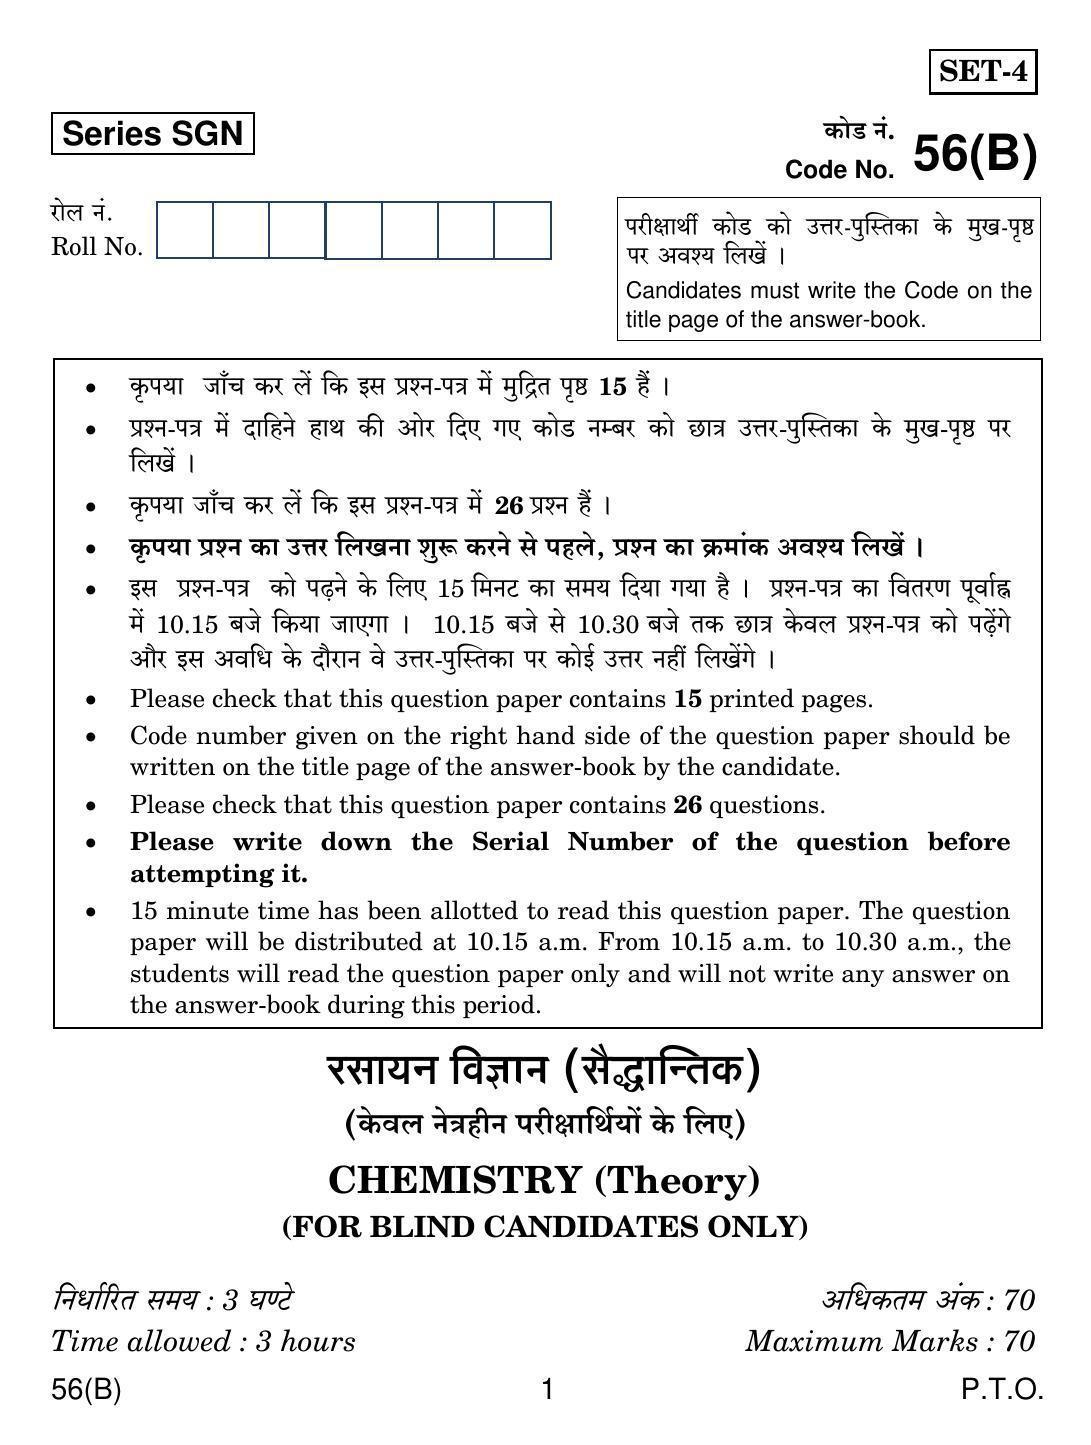 CBSE Class 12 56(B) CHEMISTRY FOR BLIND CANDIDATES 2018 Question Paper - Page 1